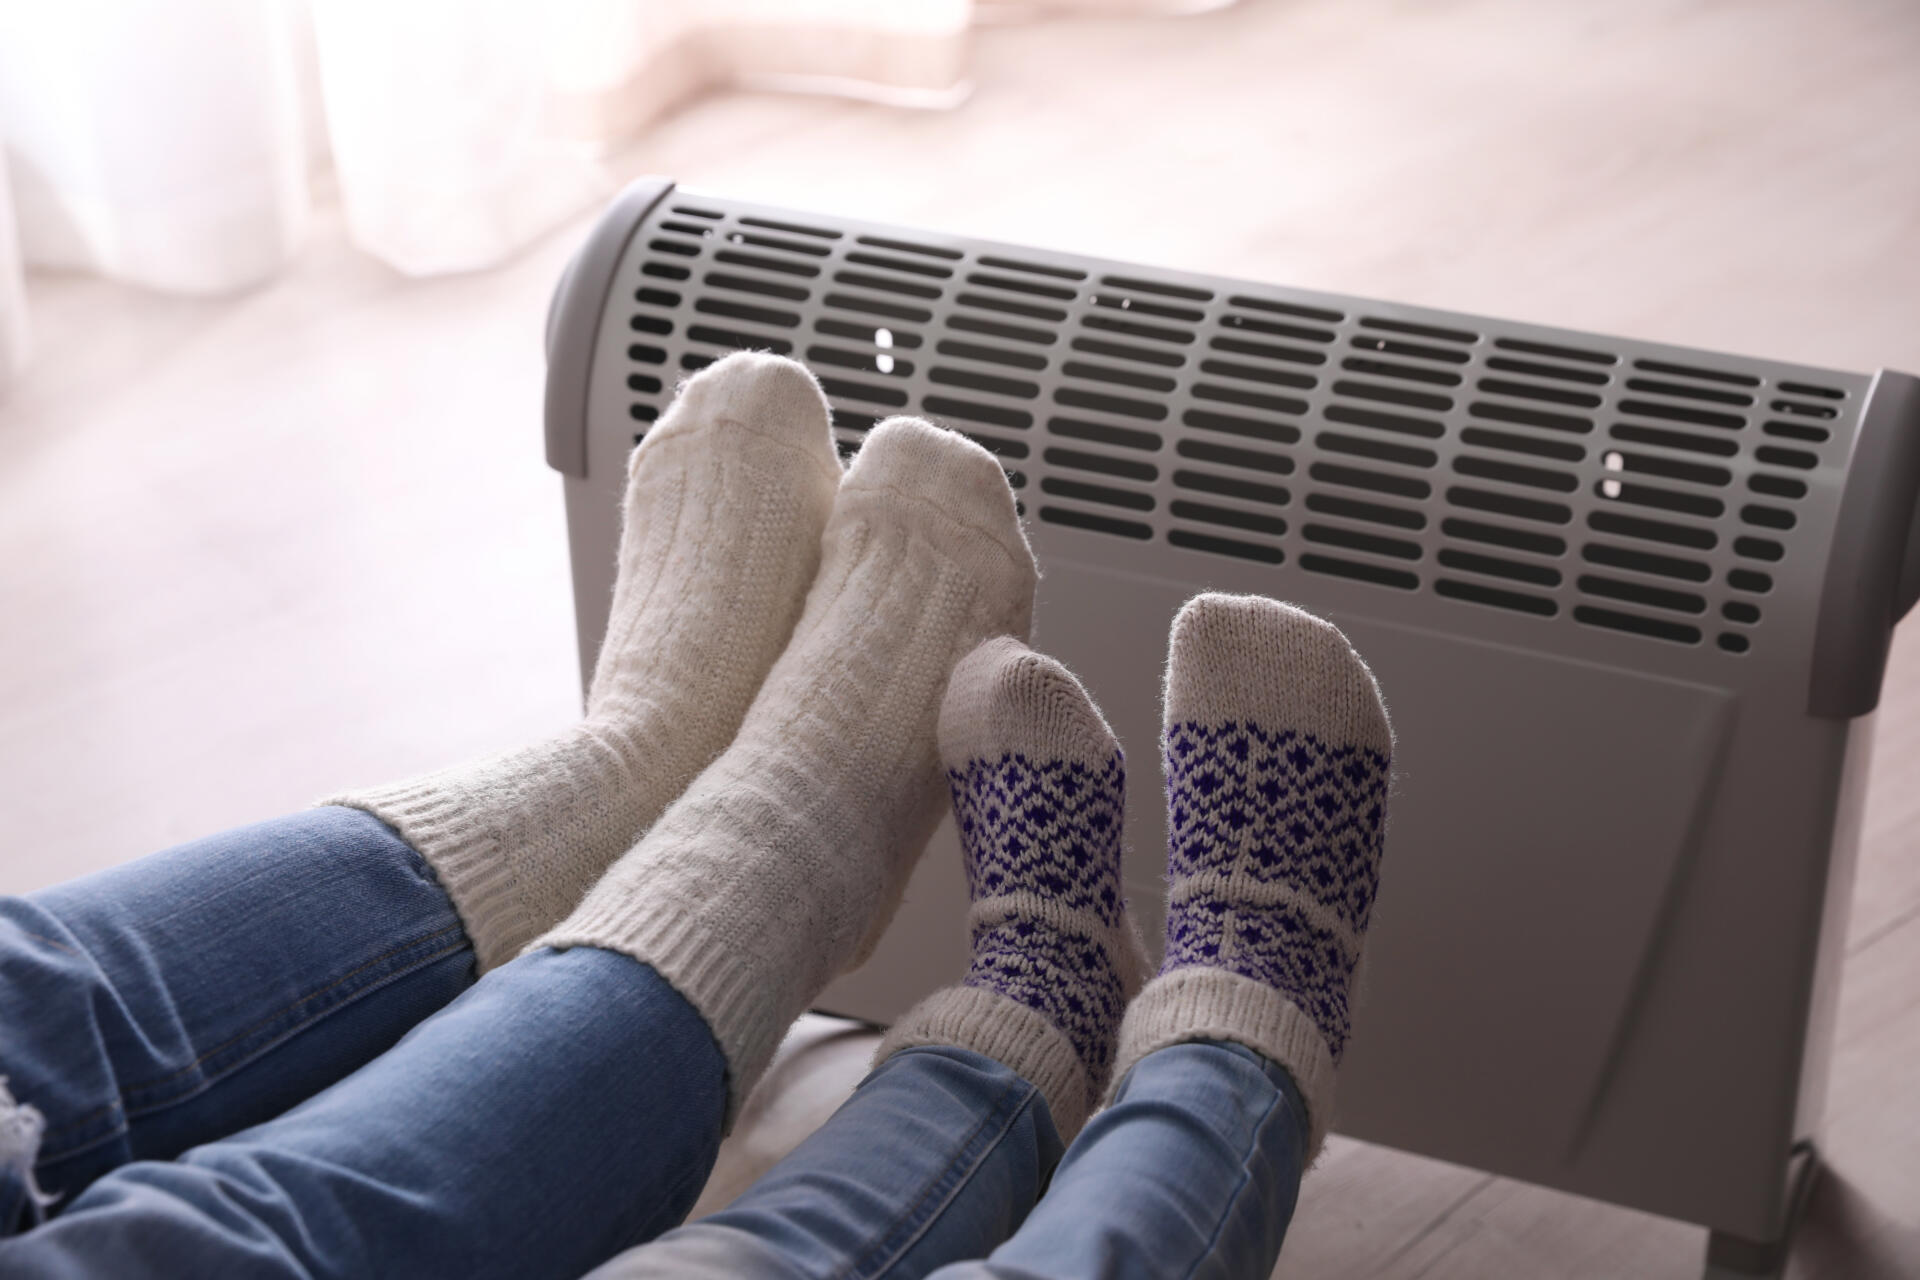 Mother and child warming feet near electric heater at home, closeup